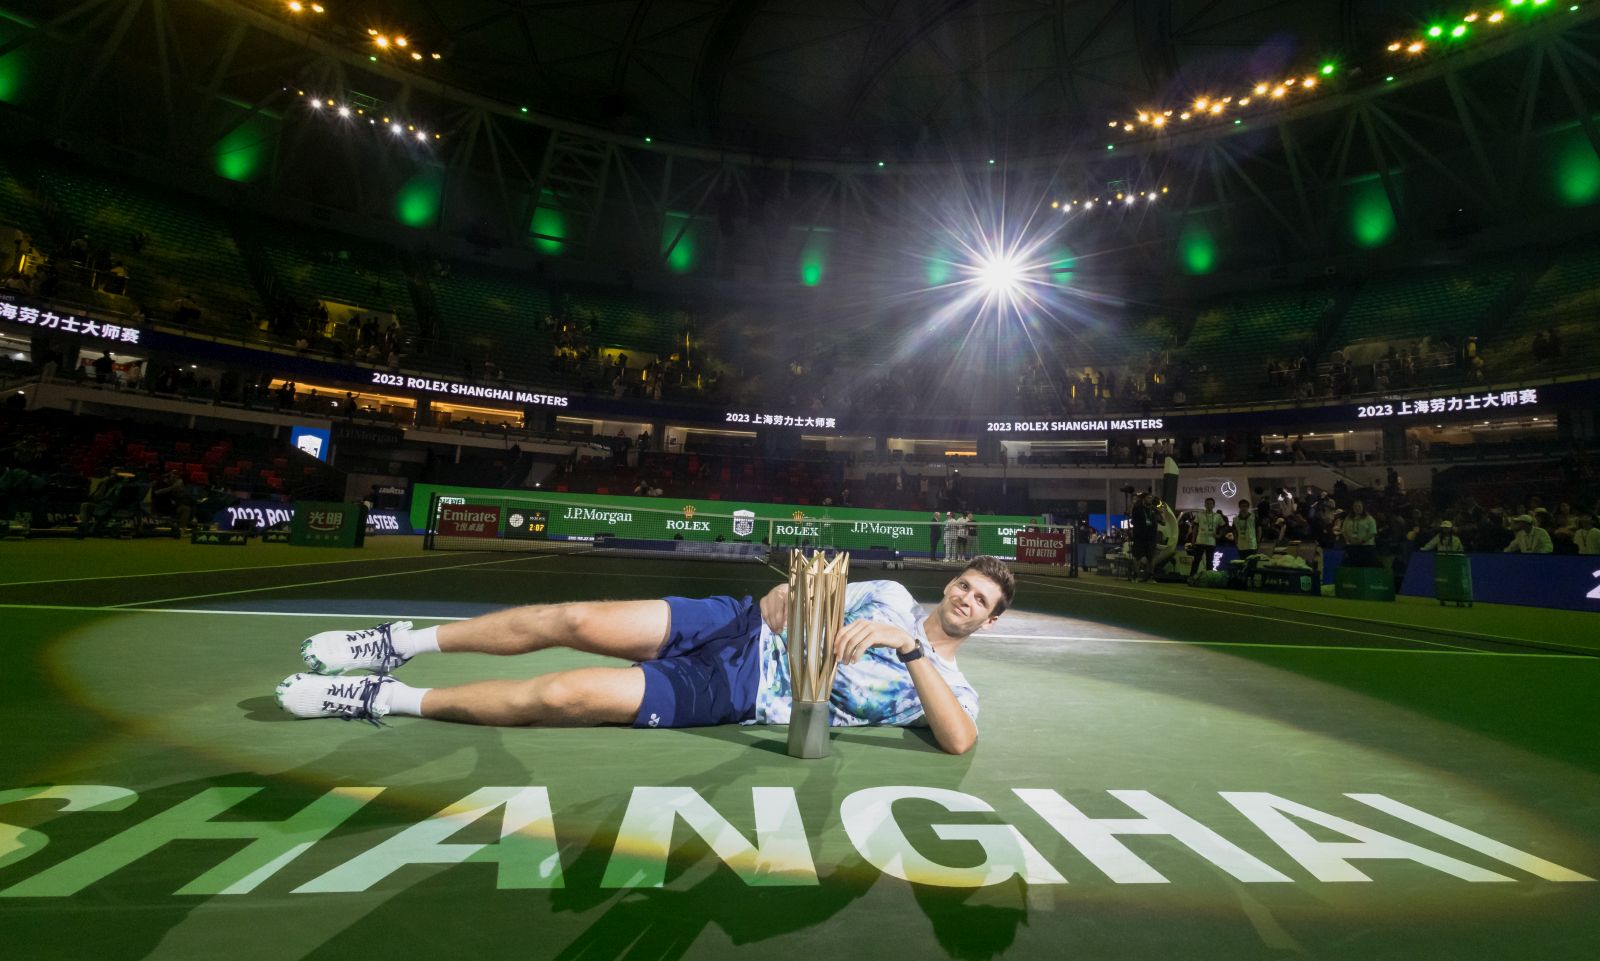 epa10920119 Hubert Hurkacz of Poland poses during the trophy ceremony after winning the final  match against Andrey Rublev of Russia at the Shanghai Masters tennis tournament, Shanghai, China, 15 October 2023.  EPA/ALEX PLAVEVSKI